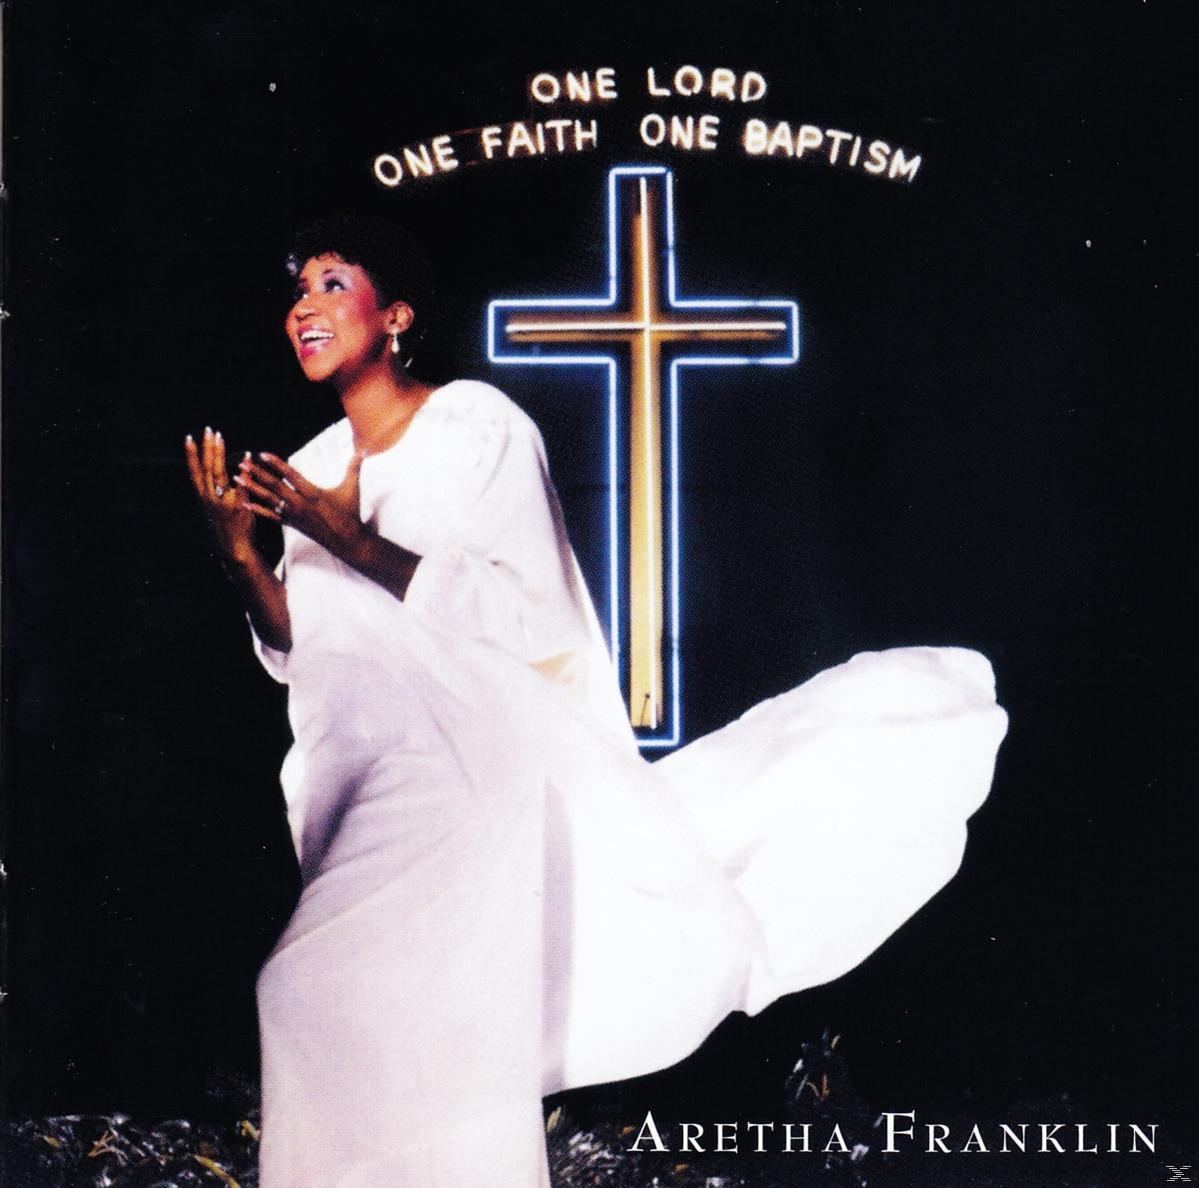 One - Franklin, - Aretha Lord,One VARIOUS Baptism (CD) Faith,One